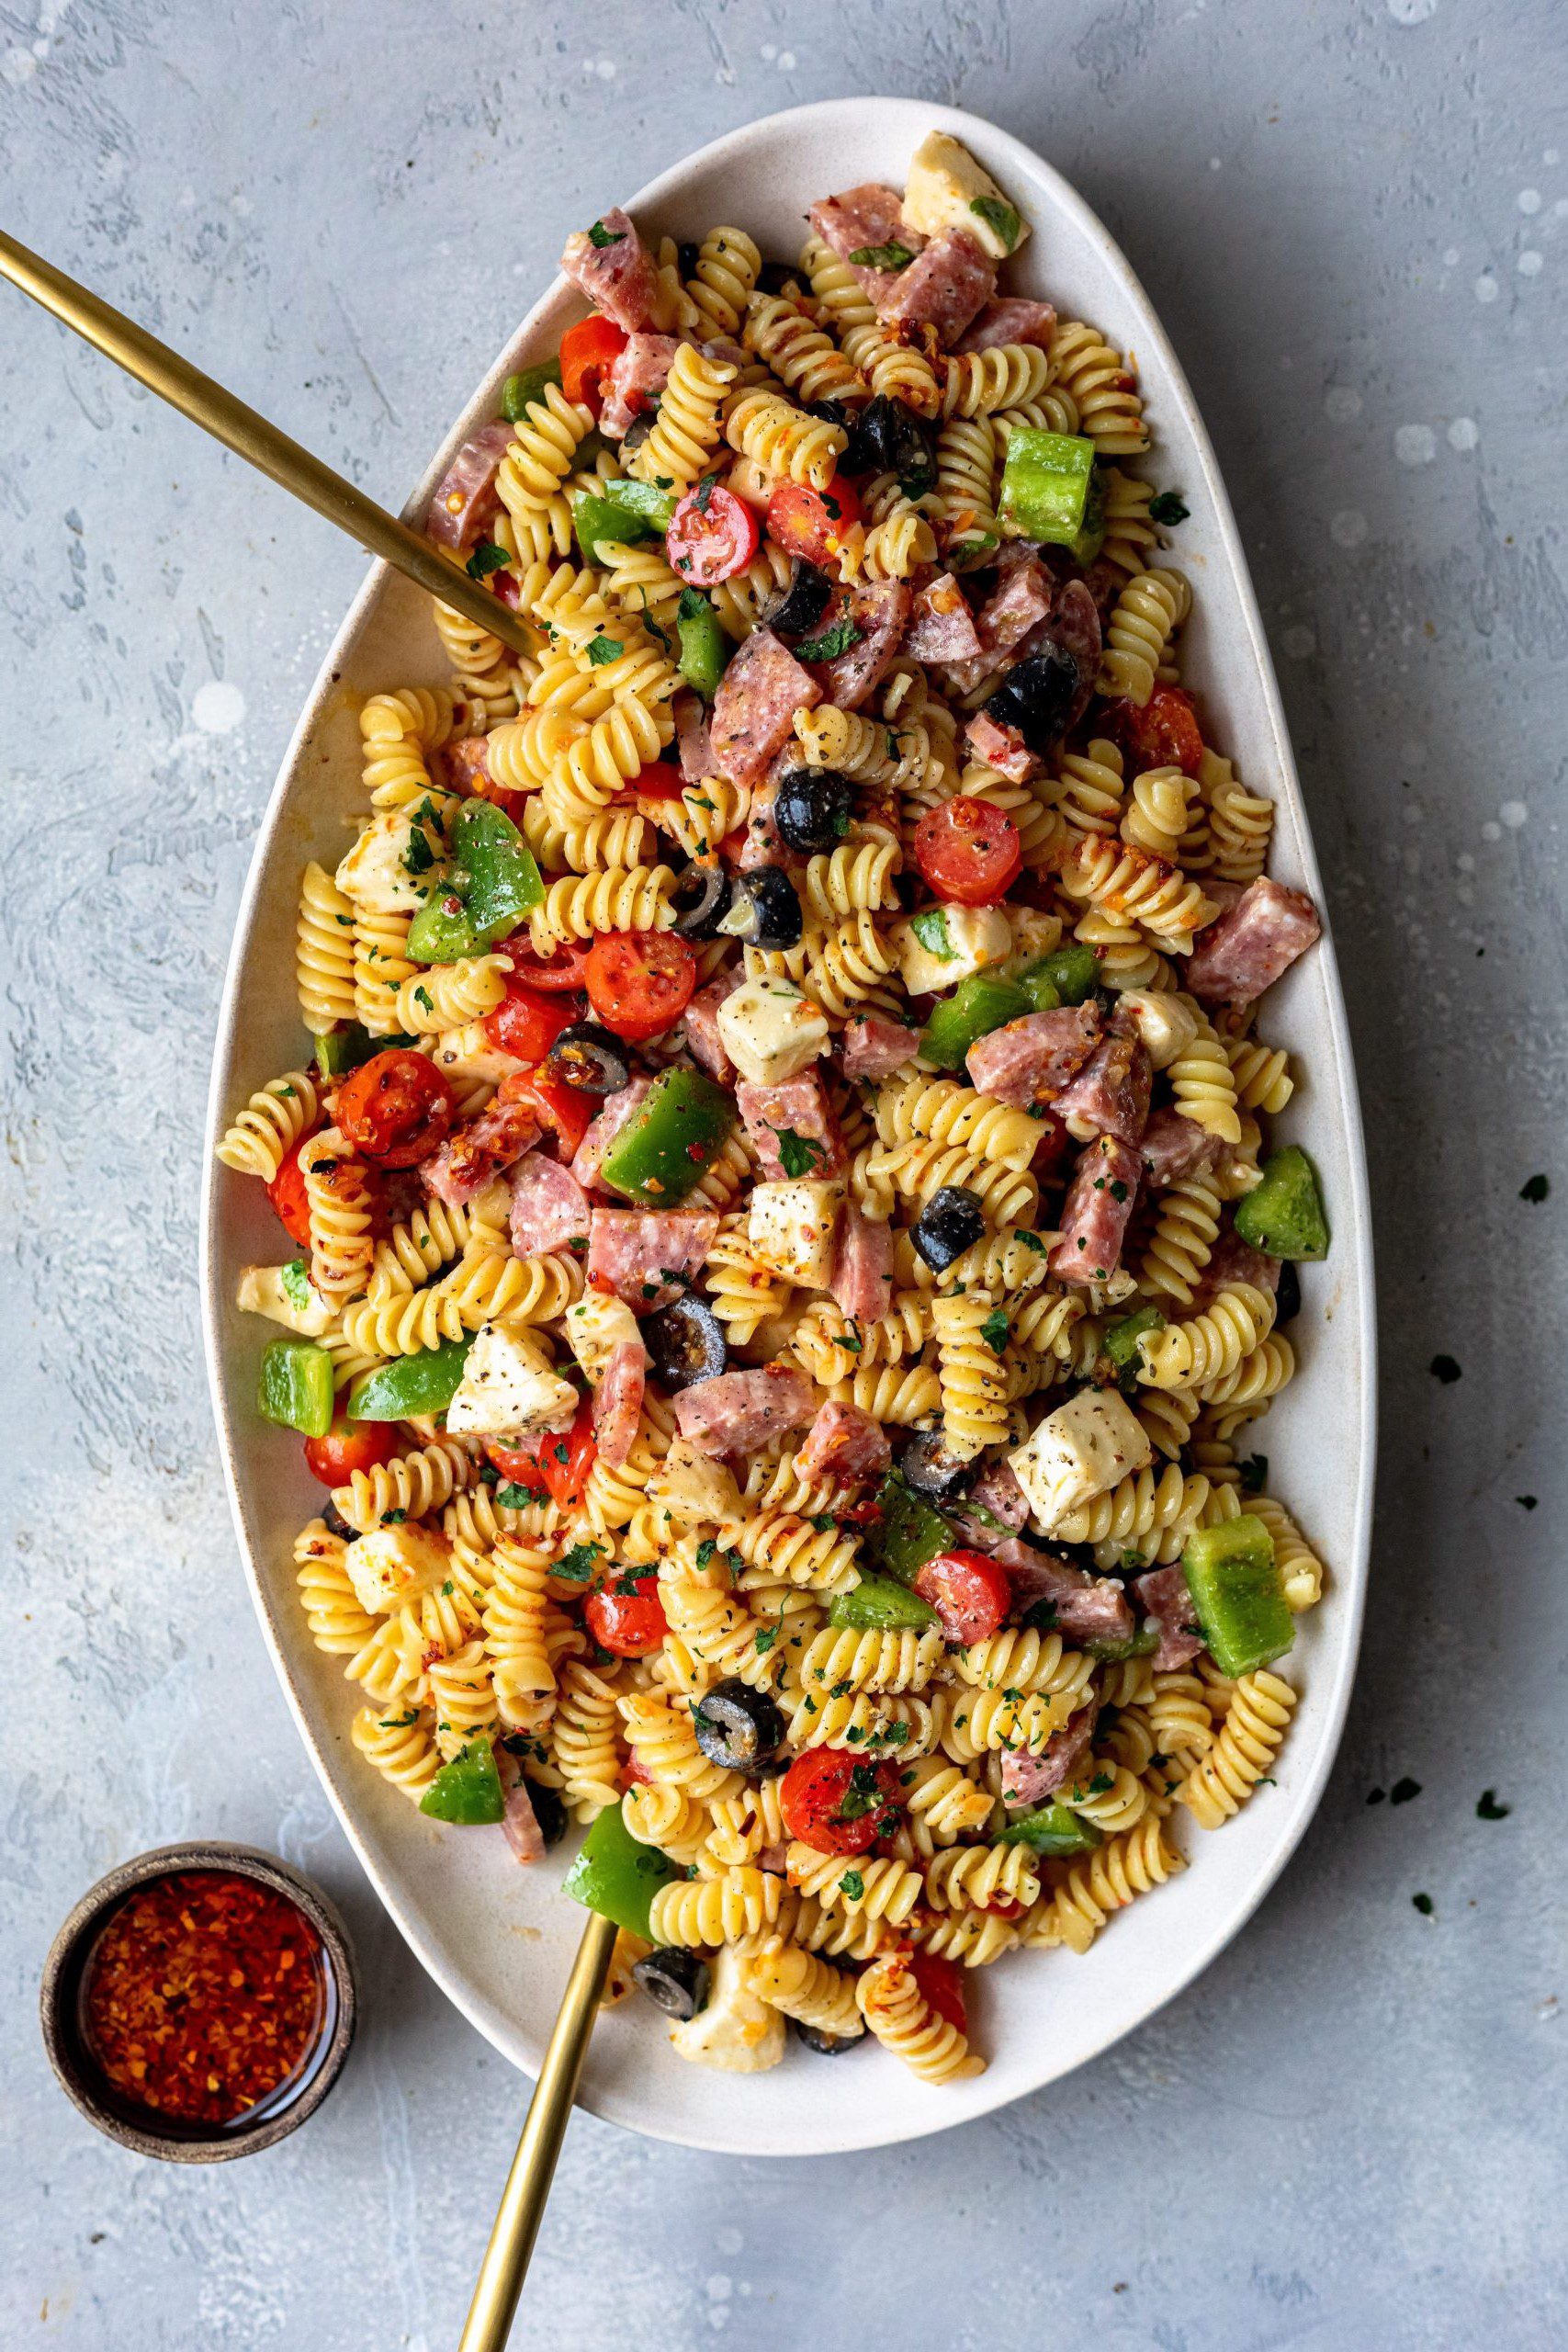 A serving platter full of pasta salad made with cooked italian meats, green bell peppers and sliced black olives.